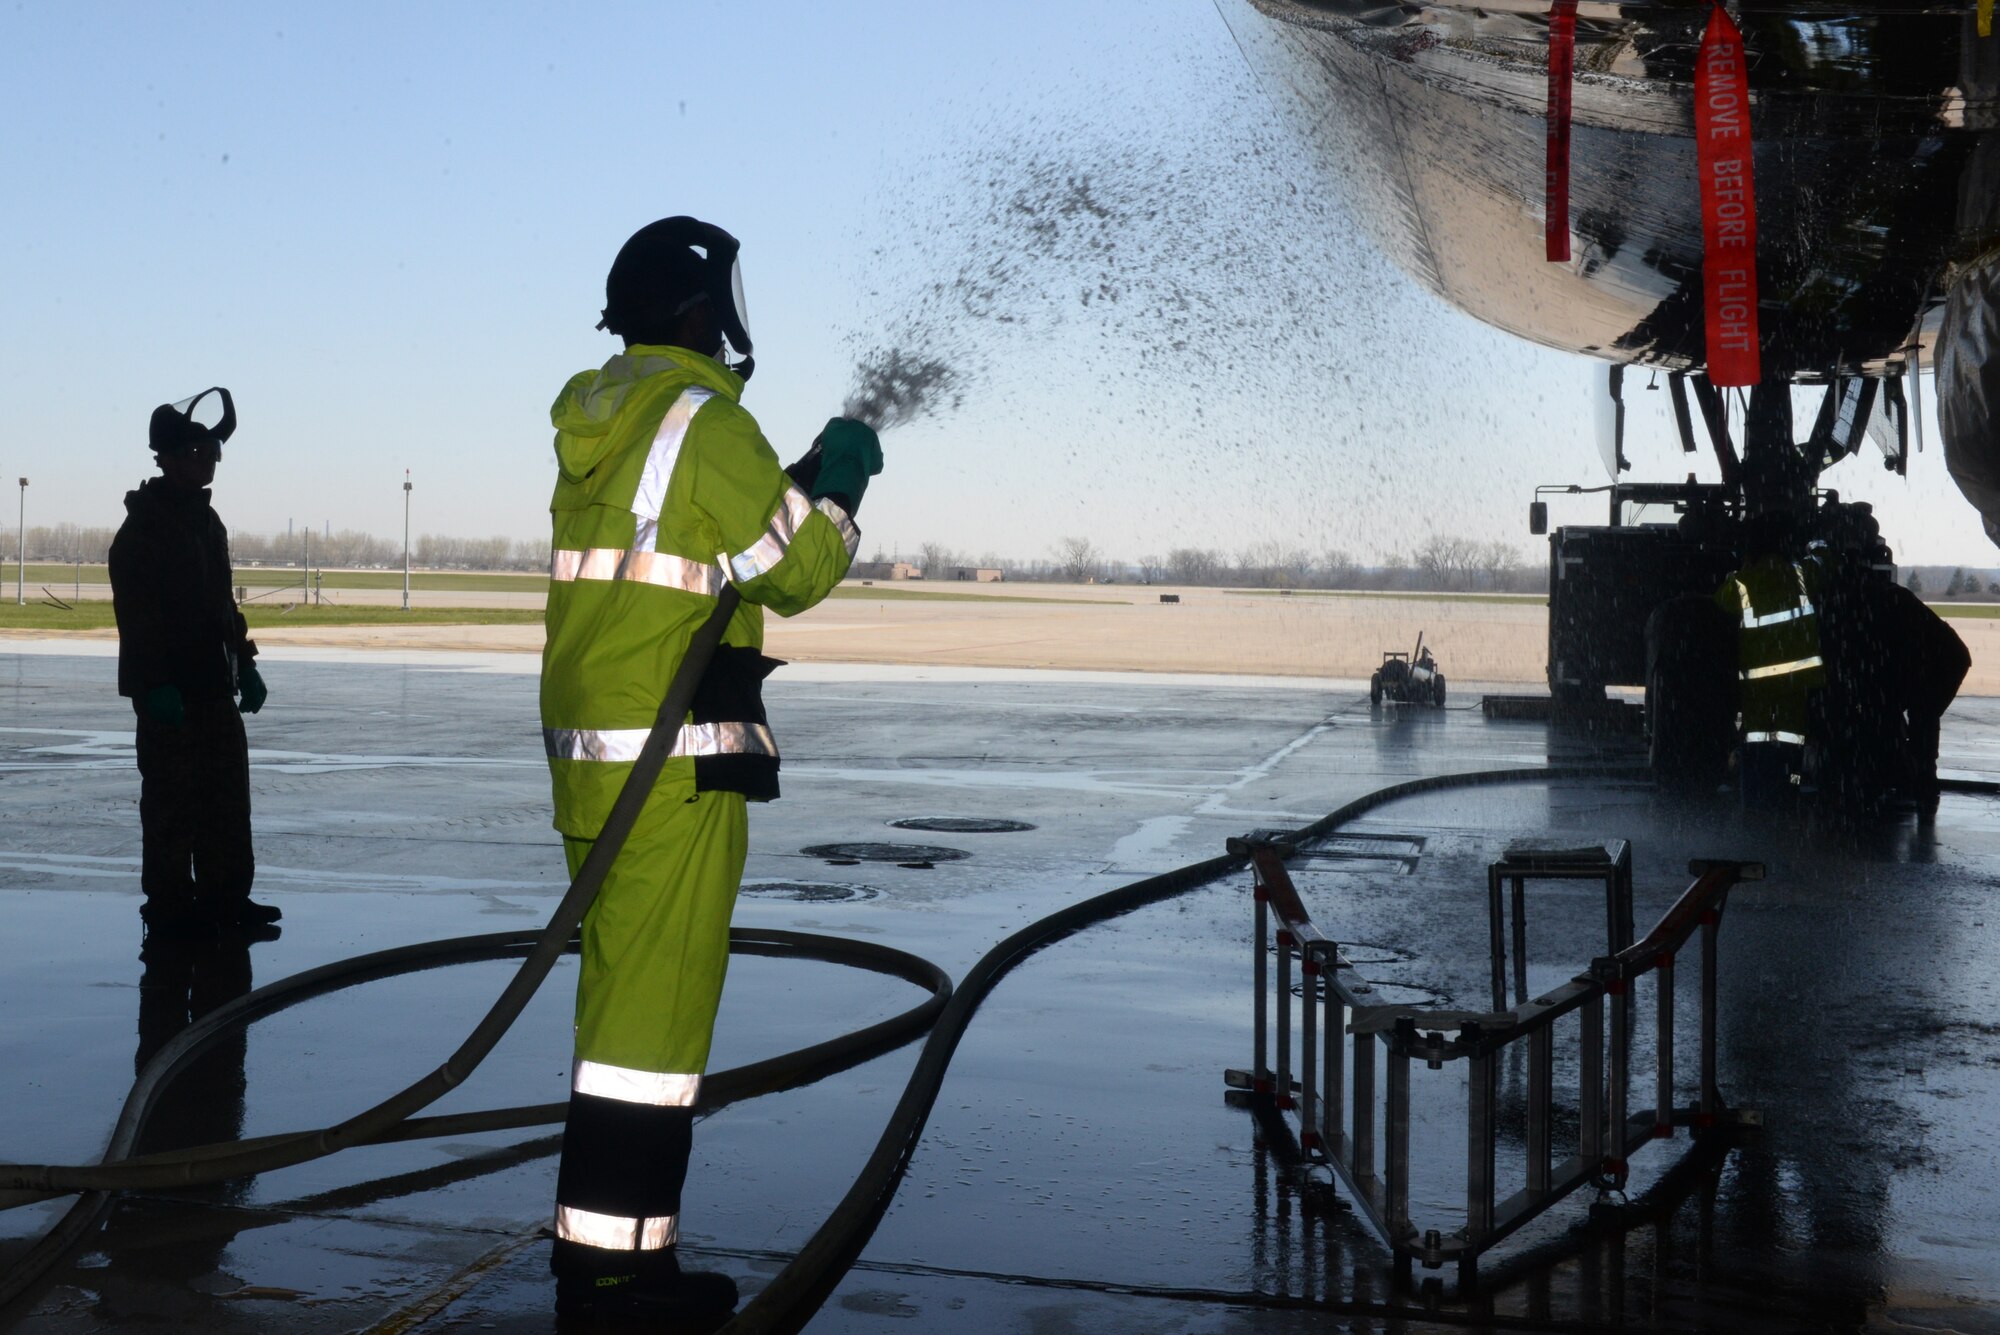 Airmen spray an E4B using a fire hose connected to a fire hydrant.